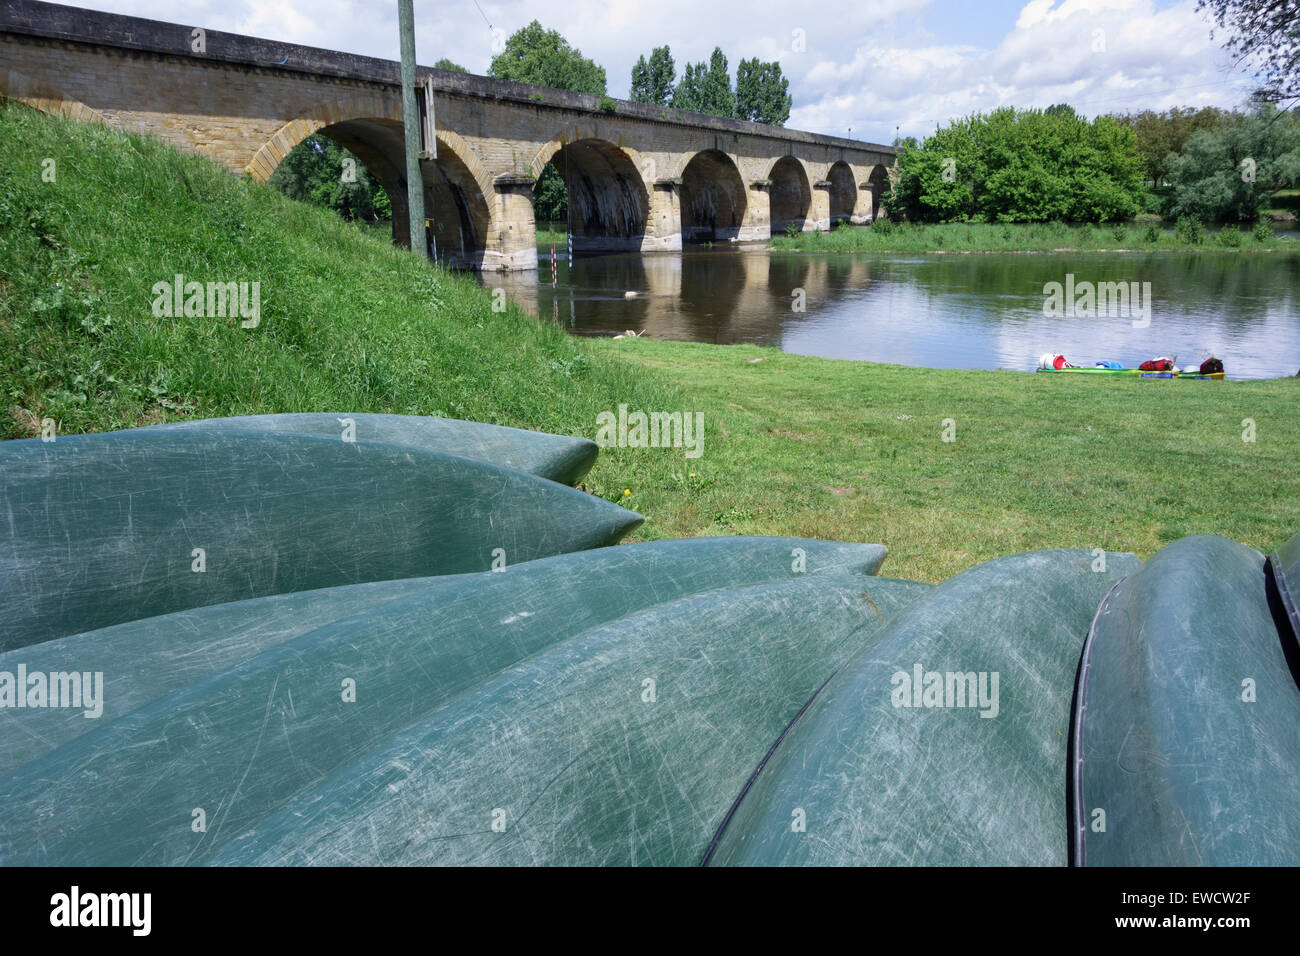 Beached canoes on the bank of the River Dordogne, near the bridge at Castelnaud la Chapelle, Perigord, France Stock Photo